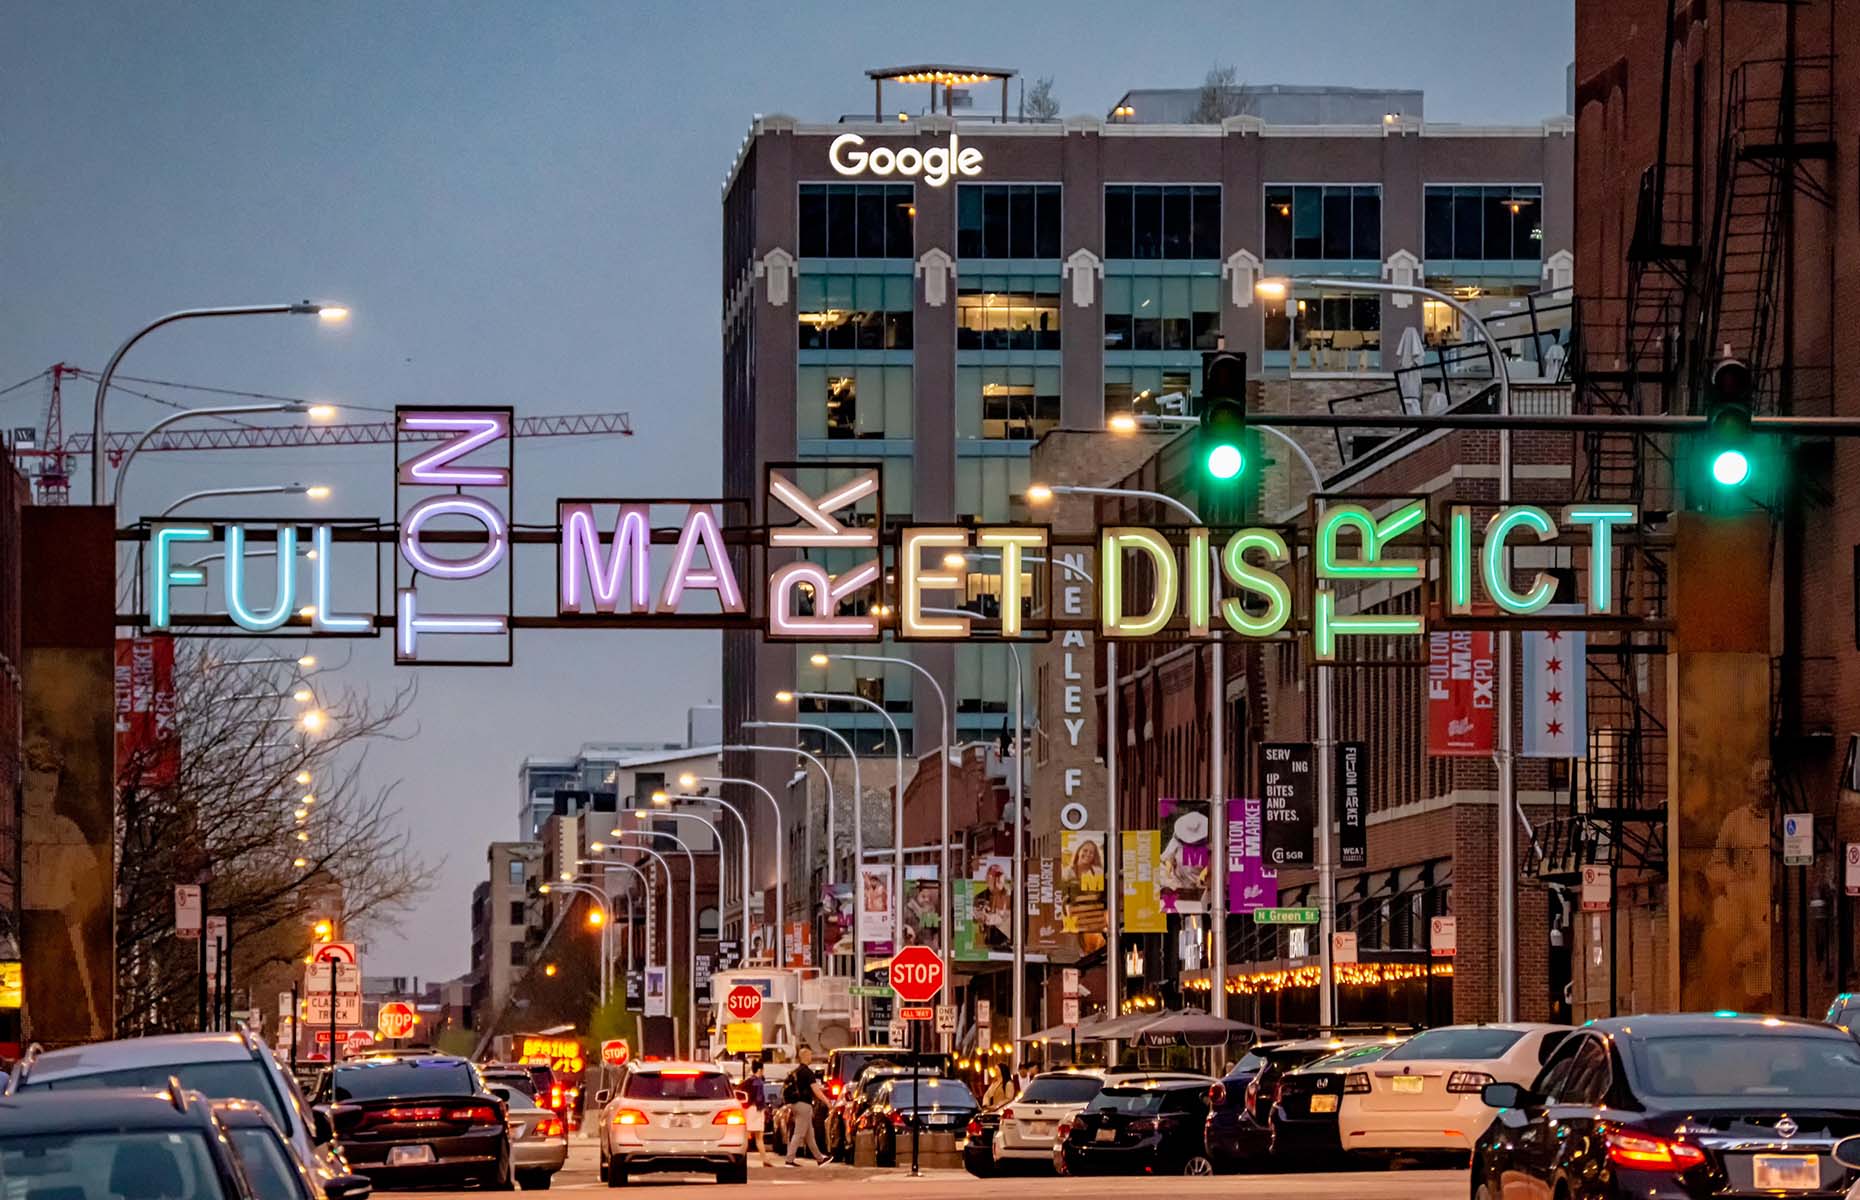 Fulton Market, Chicago (Image: Antwon McMullen/Alamy)